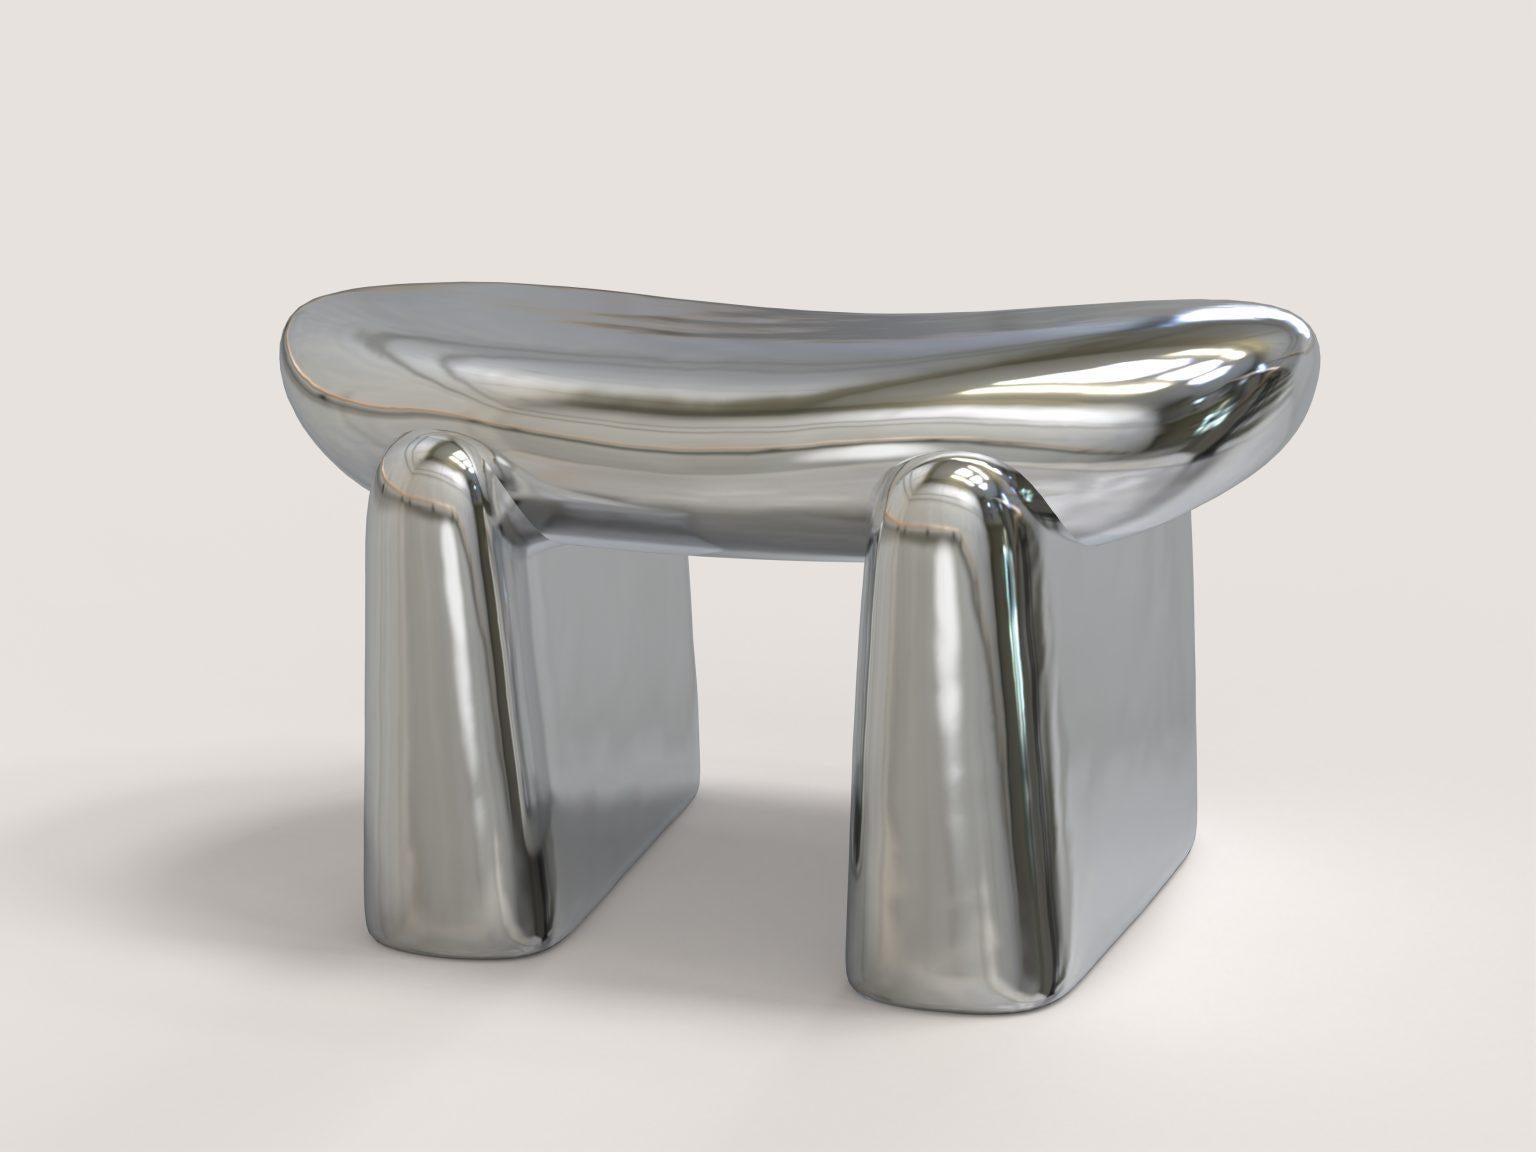 Pau silver V2 low table by Edizione Limitata
Limited Edition of 150 pieces. Signed and numbered.
Dimensions: D 50 x W 70 x H 41 cm.
Materials: Resin-coated polistyrene wtih metallic paint.

Edizione Limitata, that is to say “Limited Edition”,